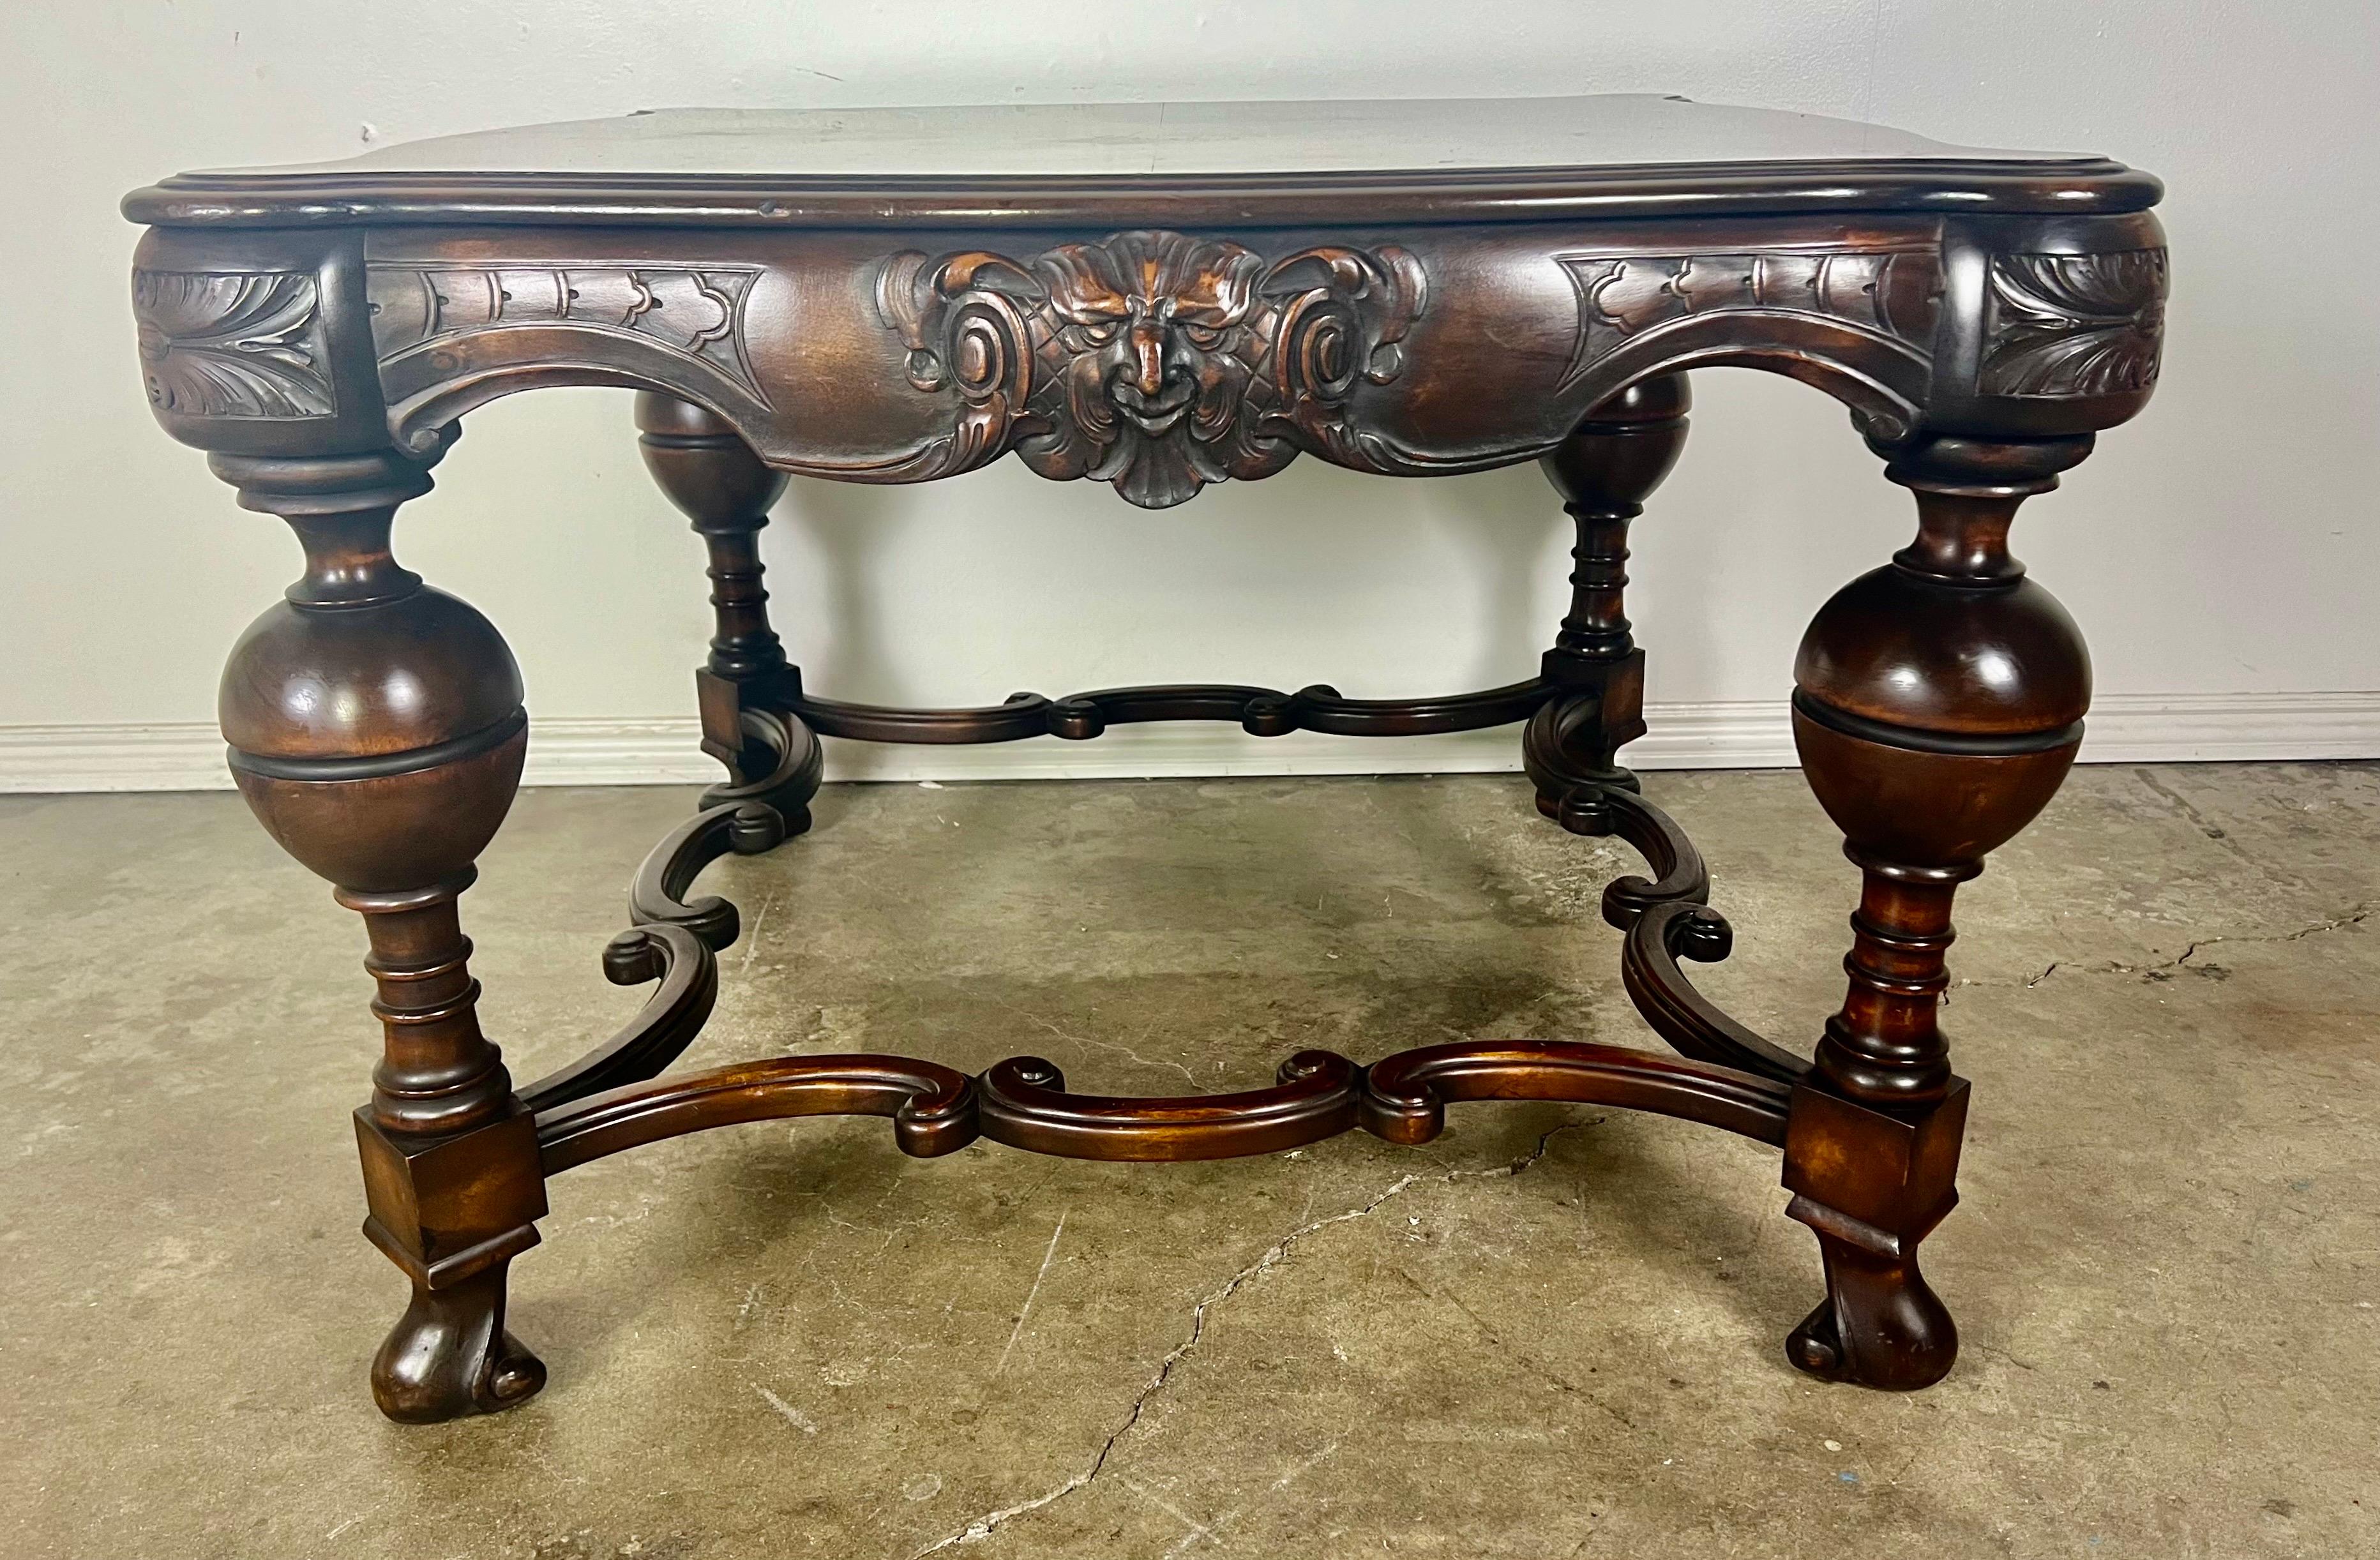 19th Century Baroque English coffee table in burl walnut, featuring beautifully turned legs and intricate carved detail.   The design reflects the elegance and craftsmanship of the Baroque era.